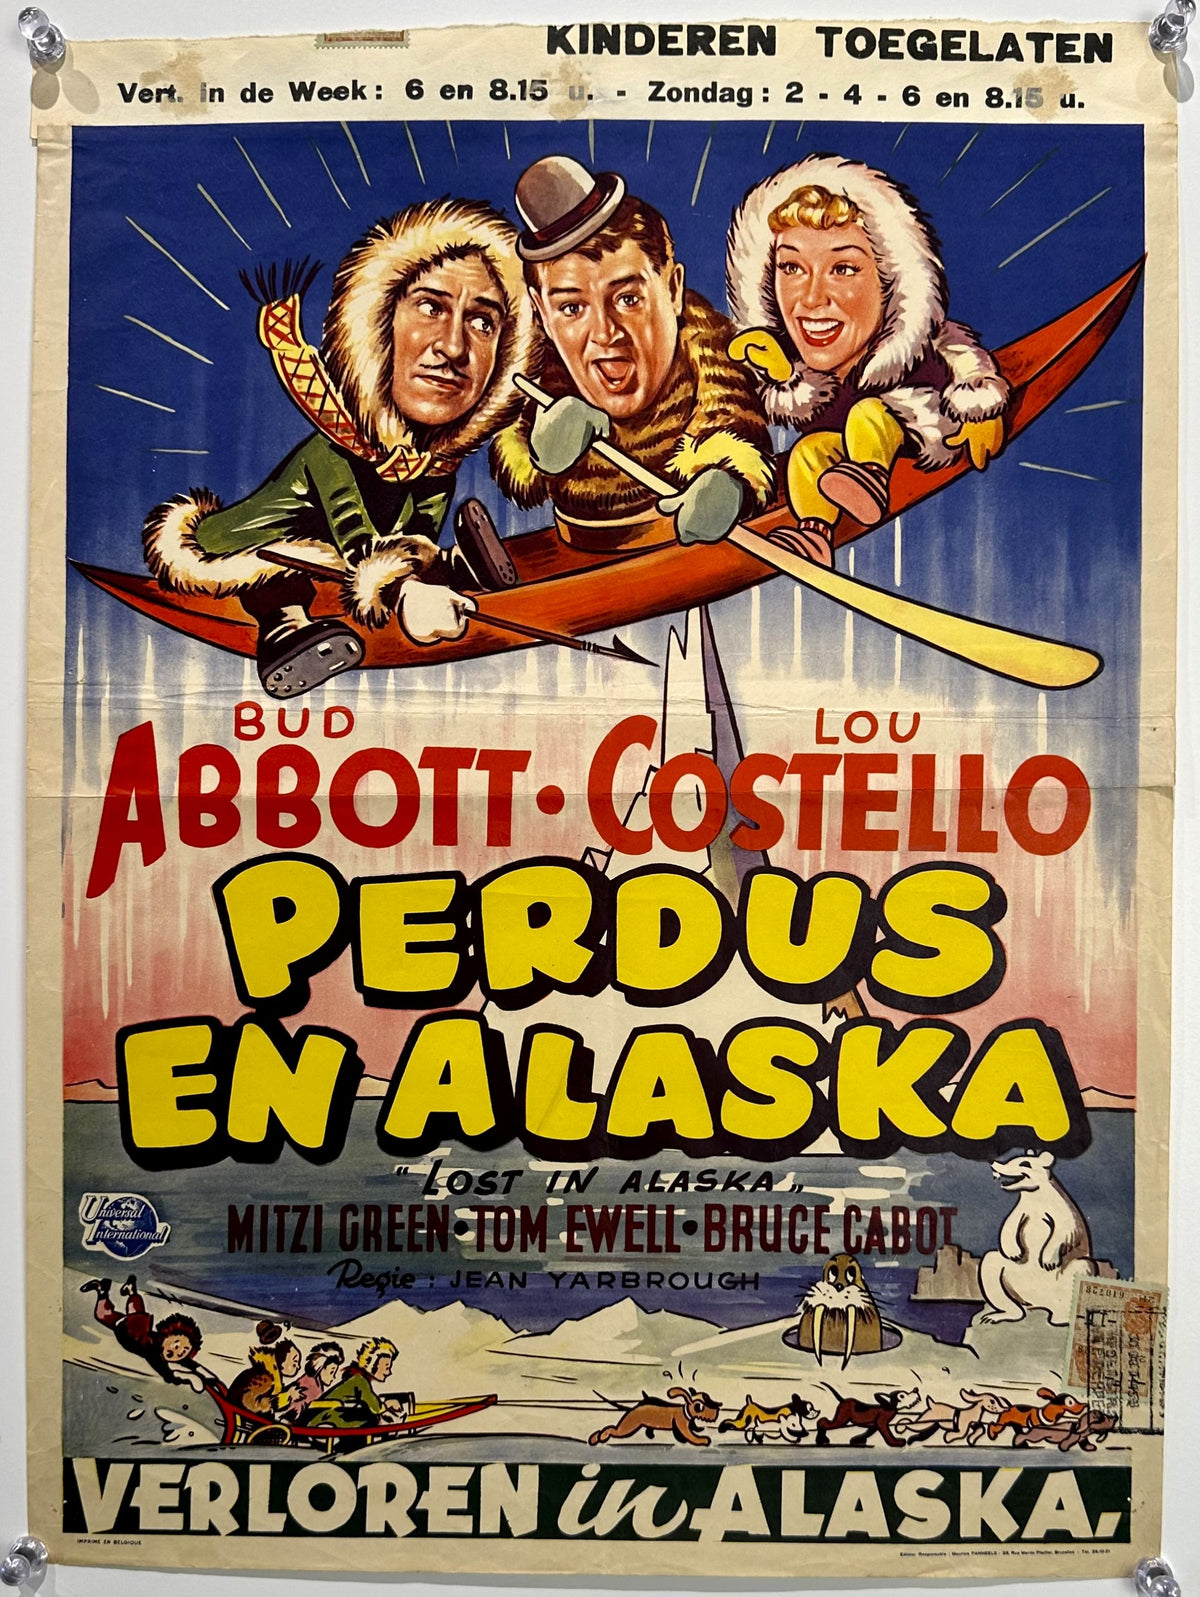 Lost in Alaska- Abbott and Costello - Authentic Vintage Poster